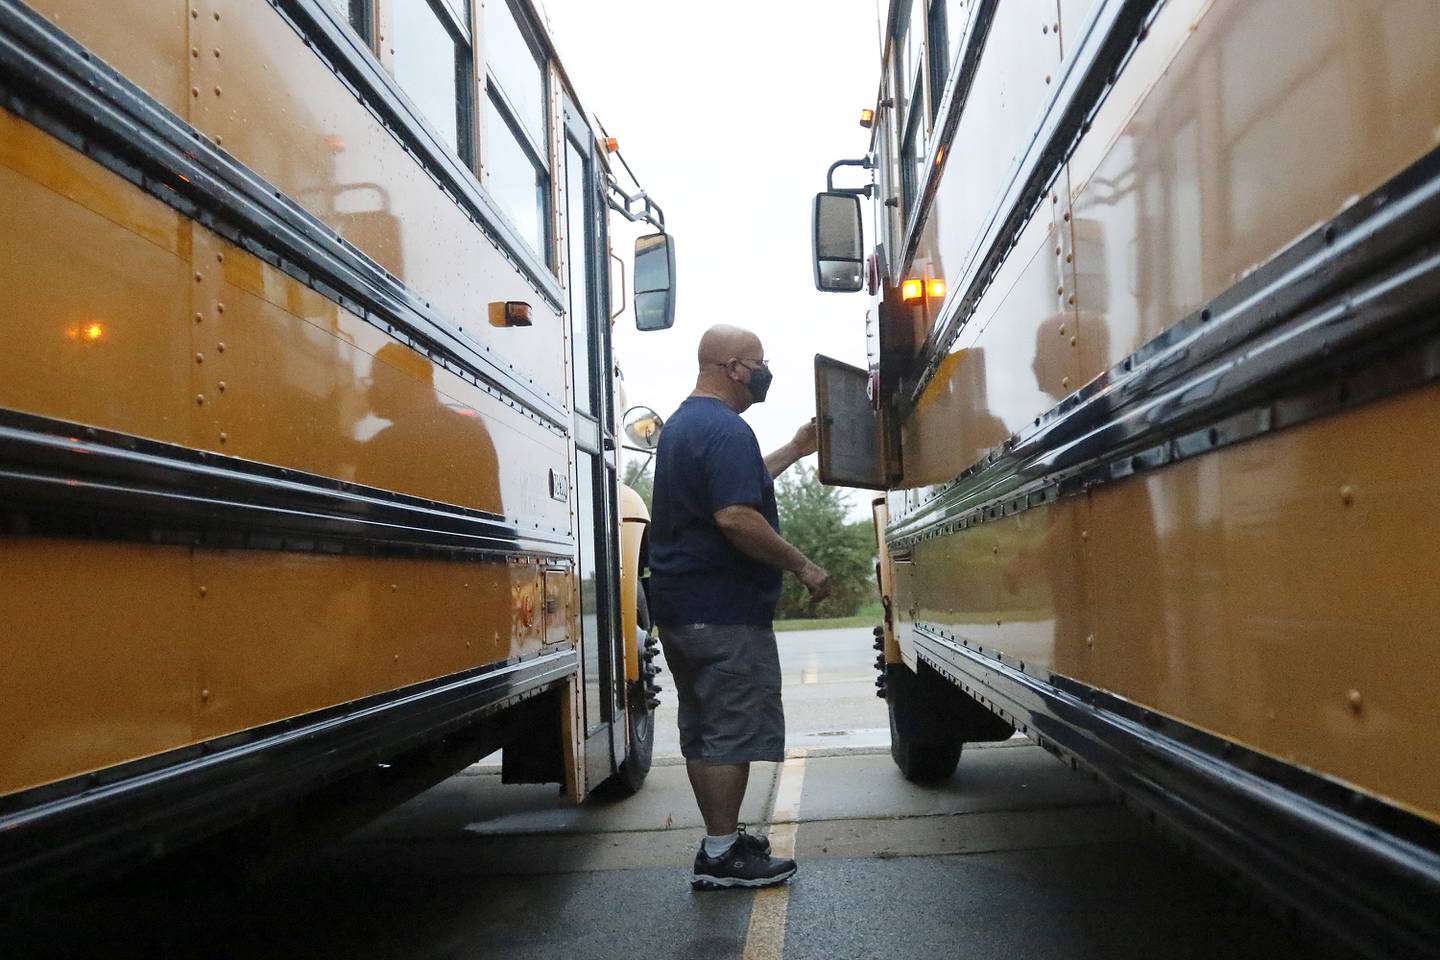 Woodstock Community Unit School District 200 school bus driver Bill Chrisos performs a routine pre-route safety check on his vehicle prior to leaving to pick students up for school on Tuesday, Oct. 5, 2021, in Woodstock.